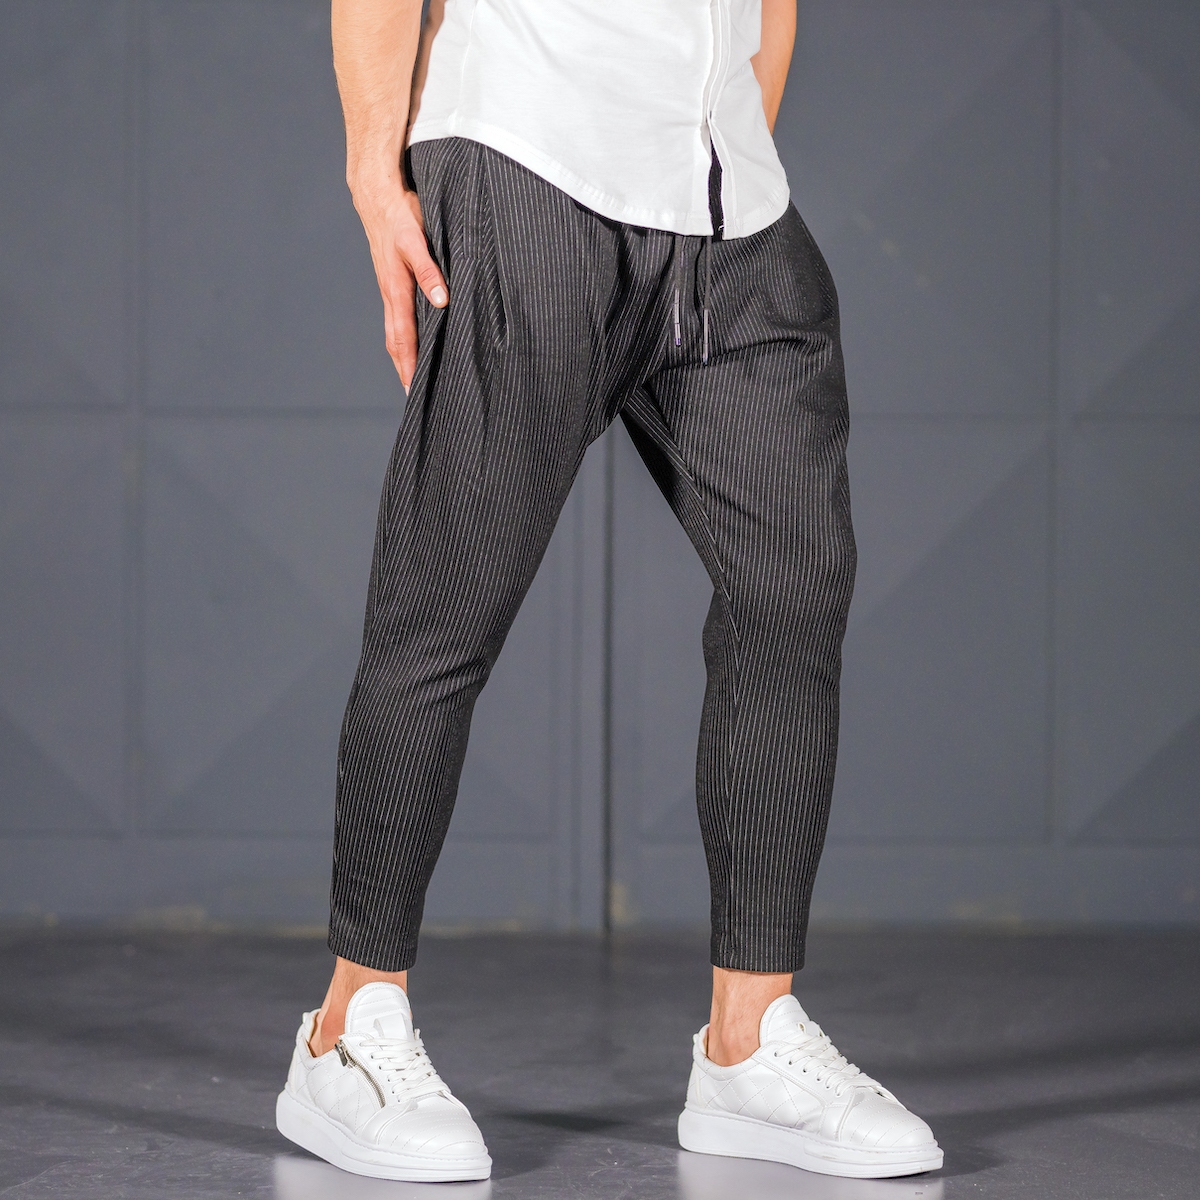 Men's Stripped Style Joggers in Black